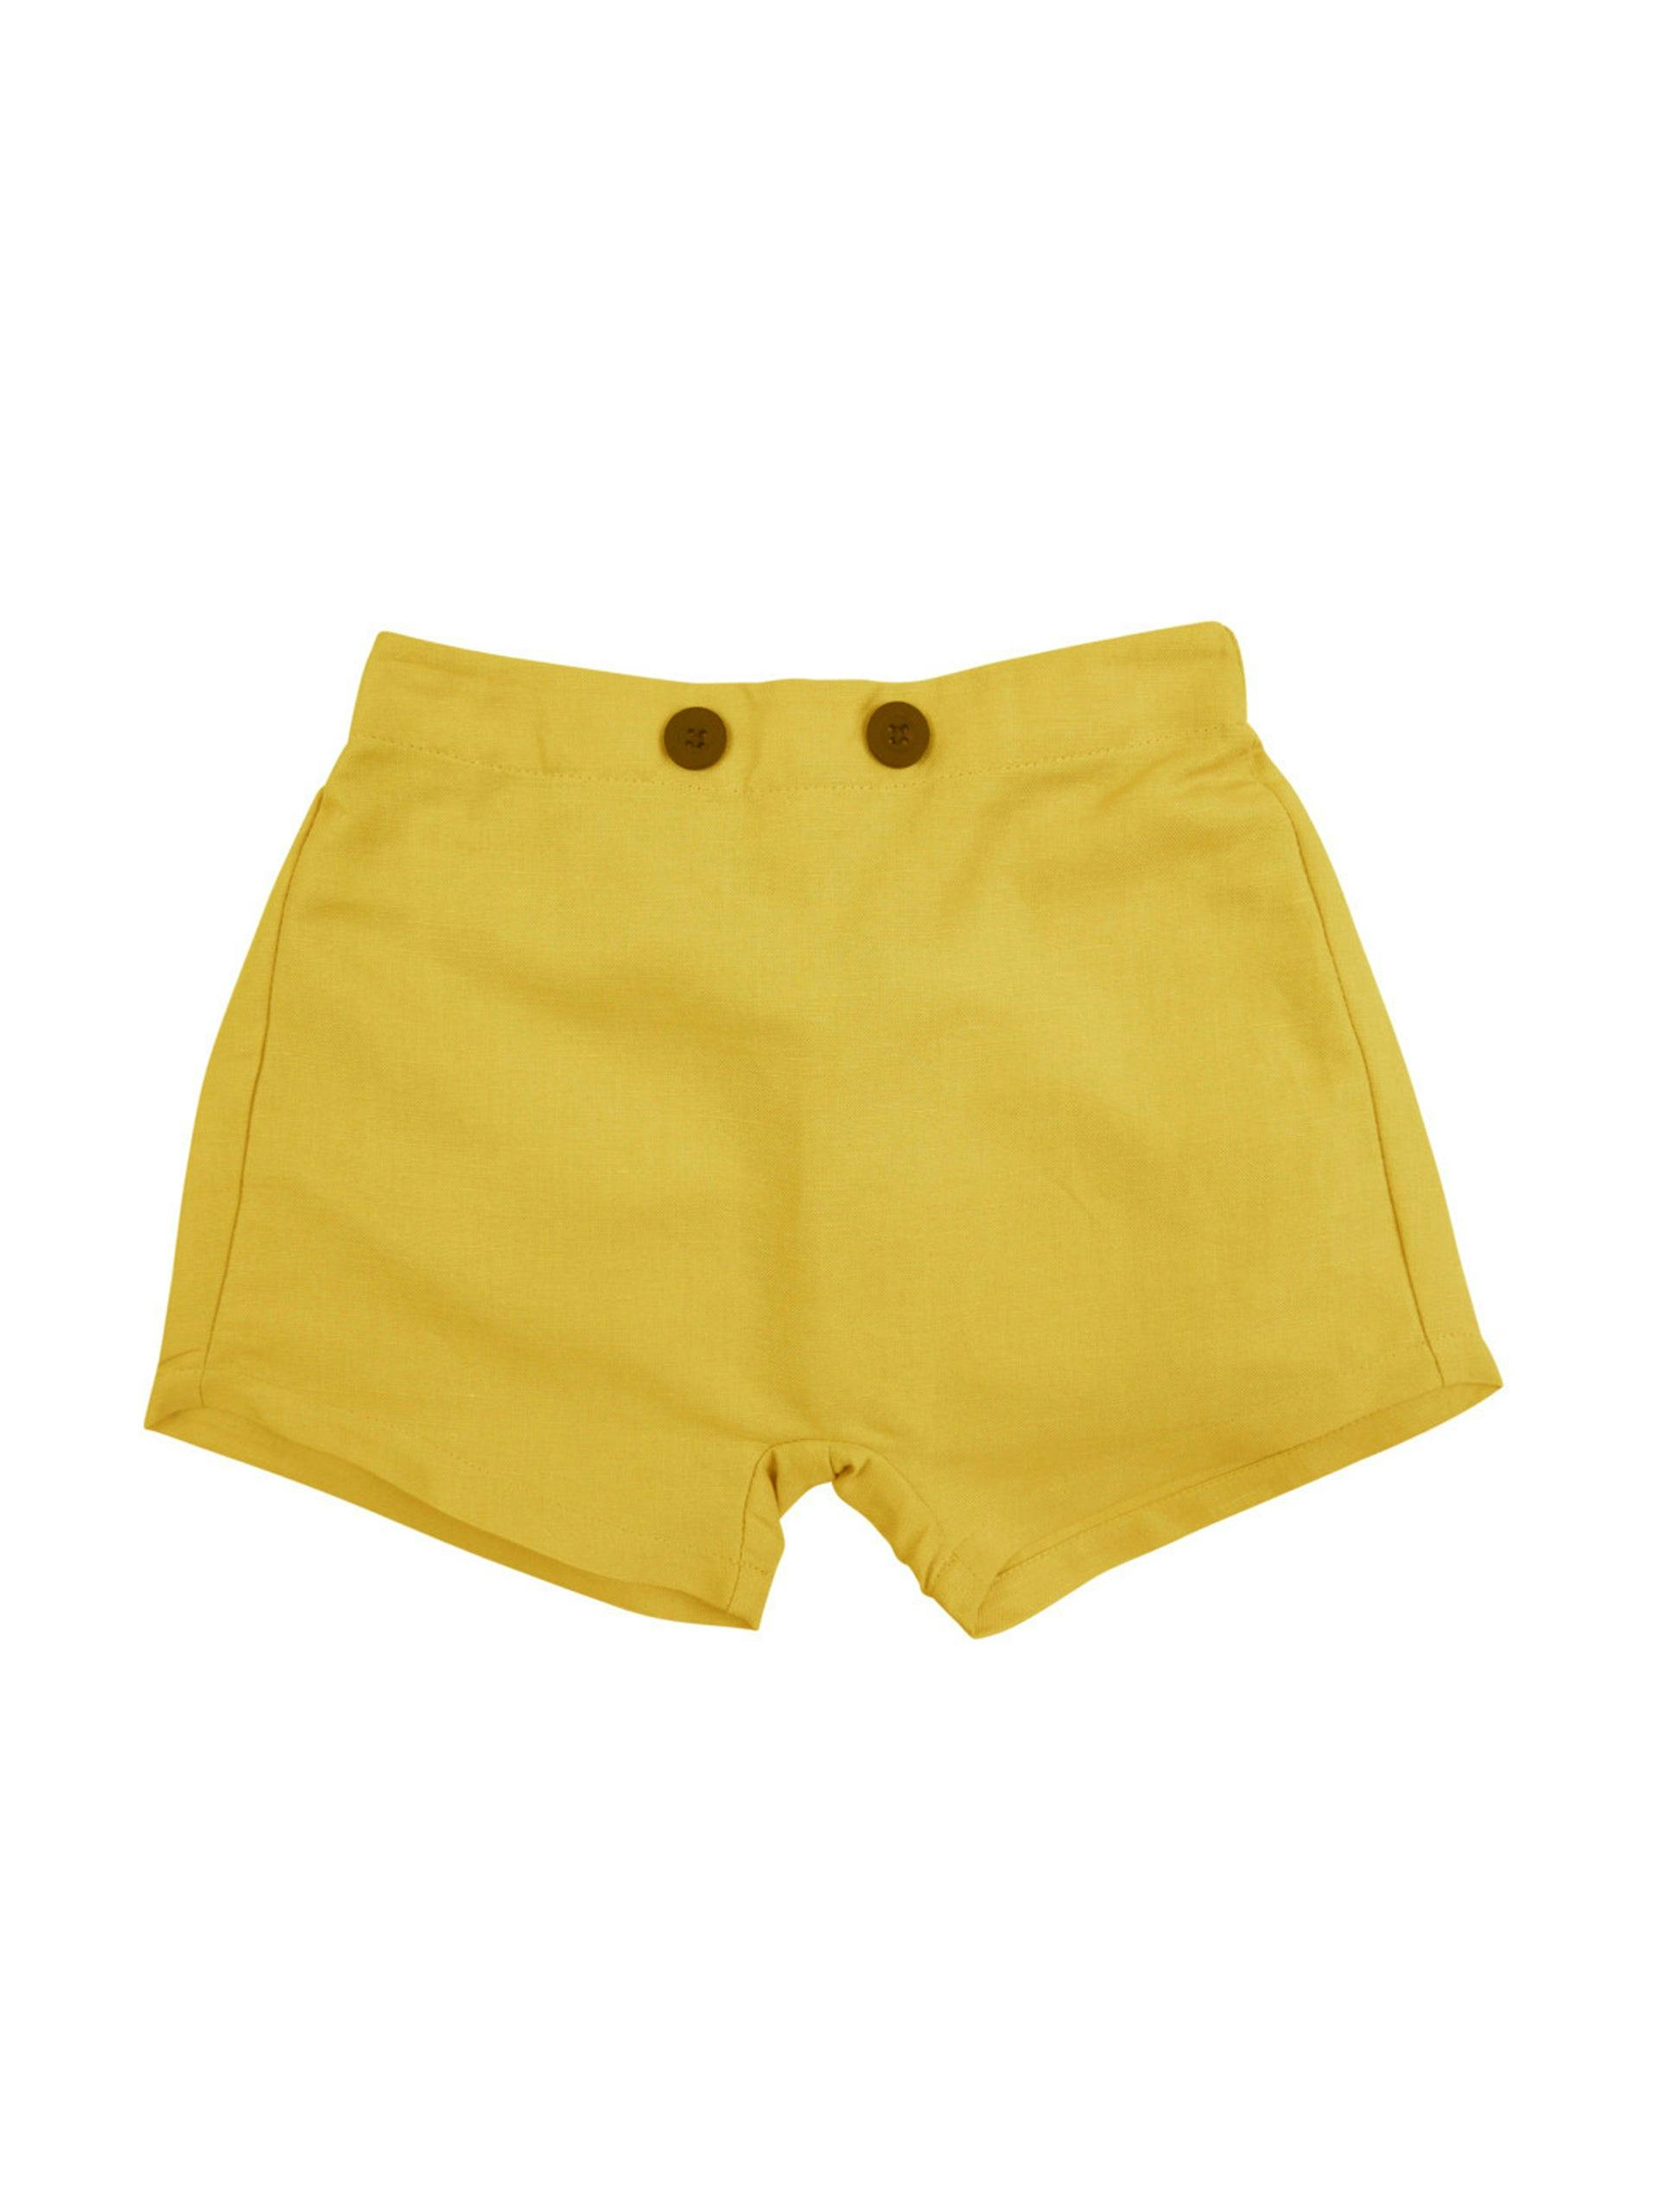 Mustard shorts with buttons